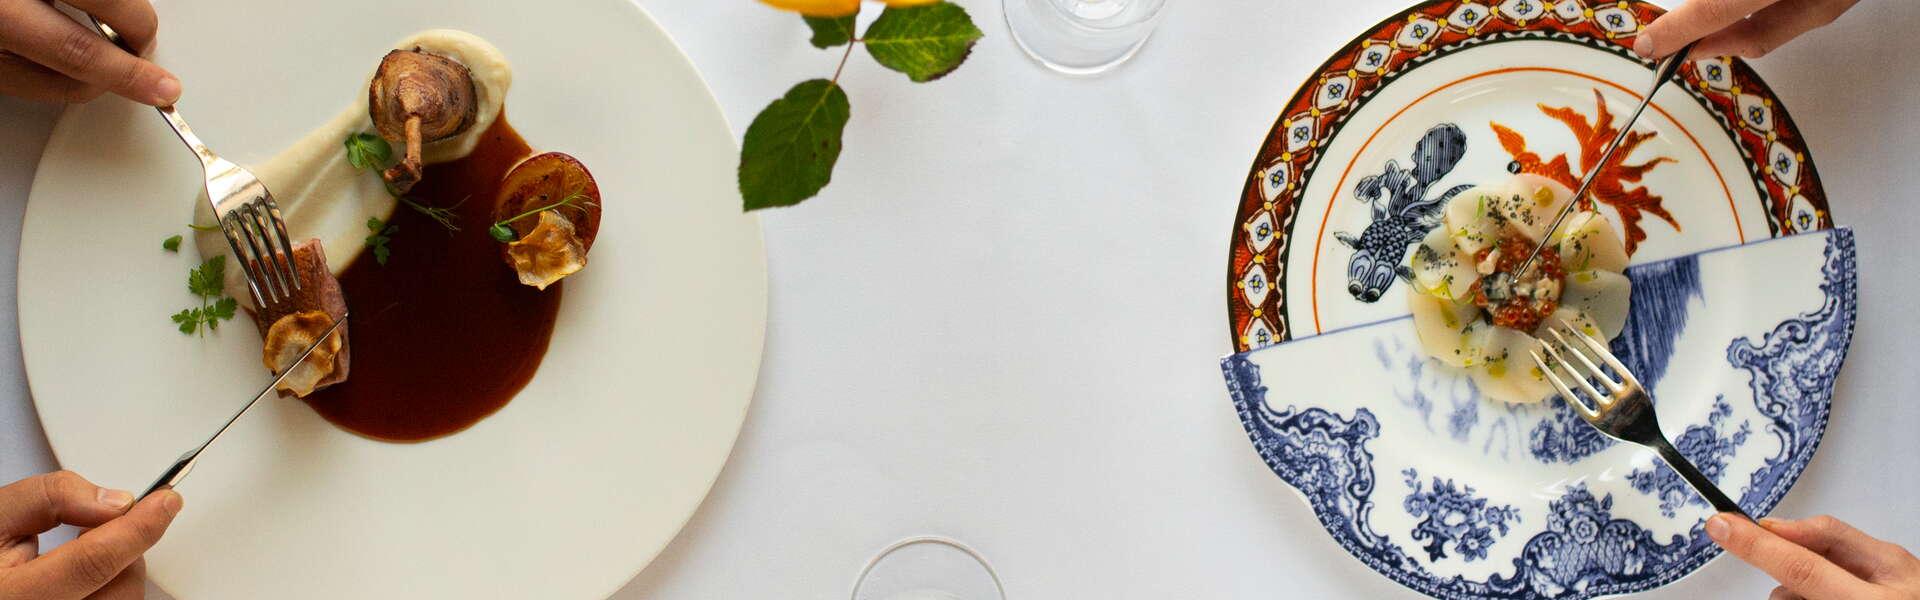 2 plates of dishes elegantly served, white tablecloth and wine glasses